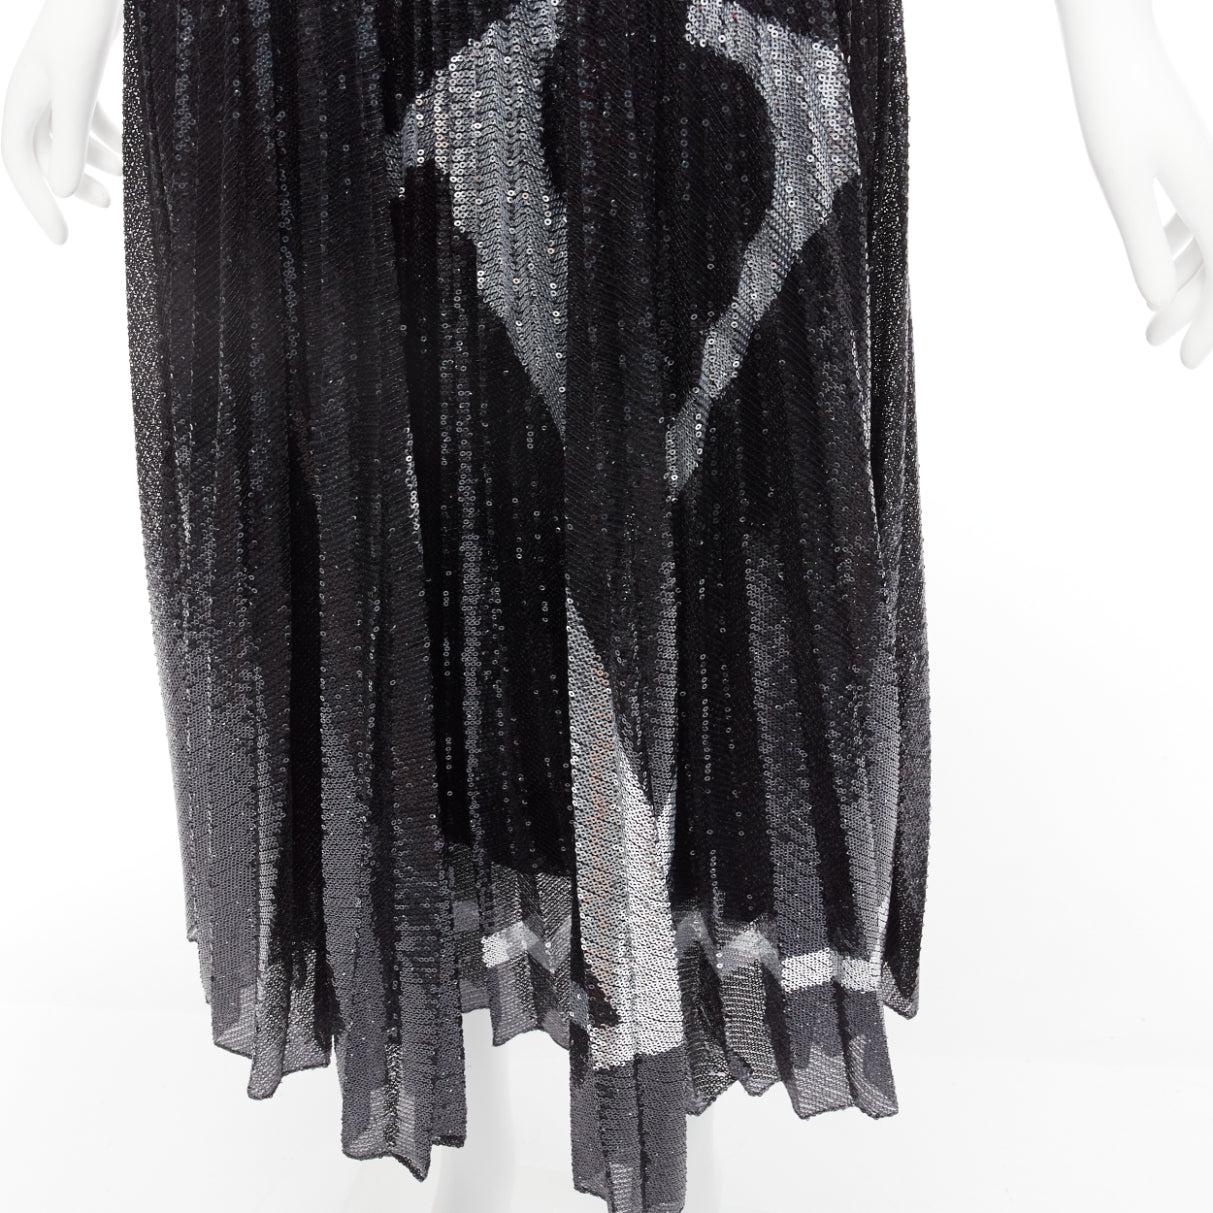 VALENTINO VLOGO black silver sequins embellished pleated plisse midi skirt XS
Reference: AAWC/A00588
Brand: Valentino
Designer: Pier Paolo Piccioli
Collection: VLOGO
Material: Polyester
Color: Black, Silver
Pattern: Logomania
Closure: Zip
Lining: